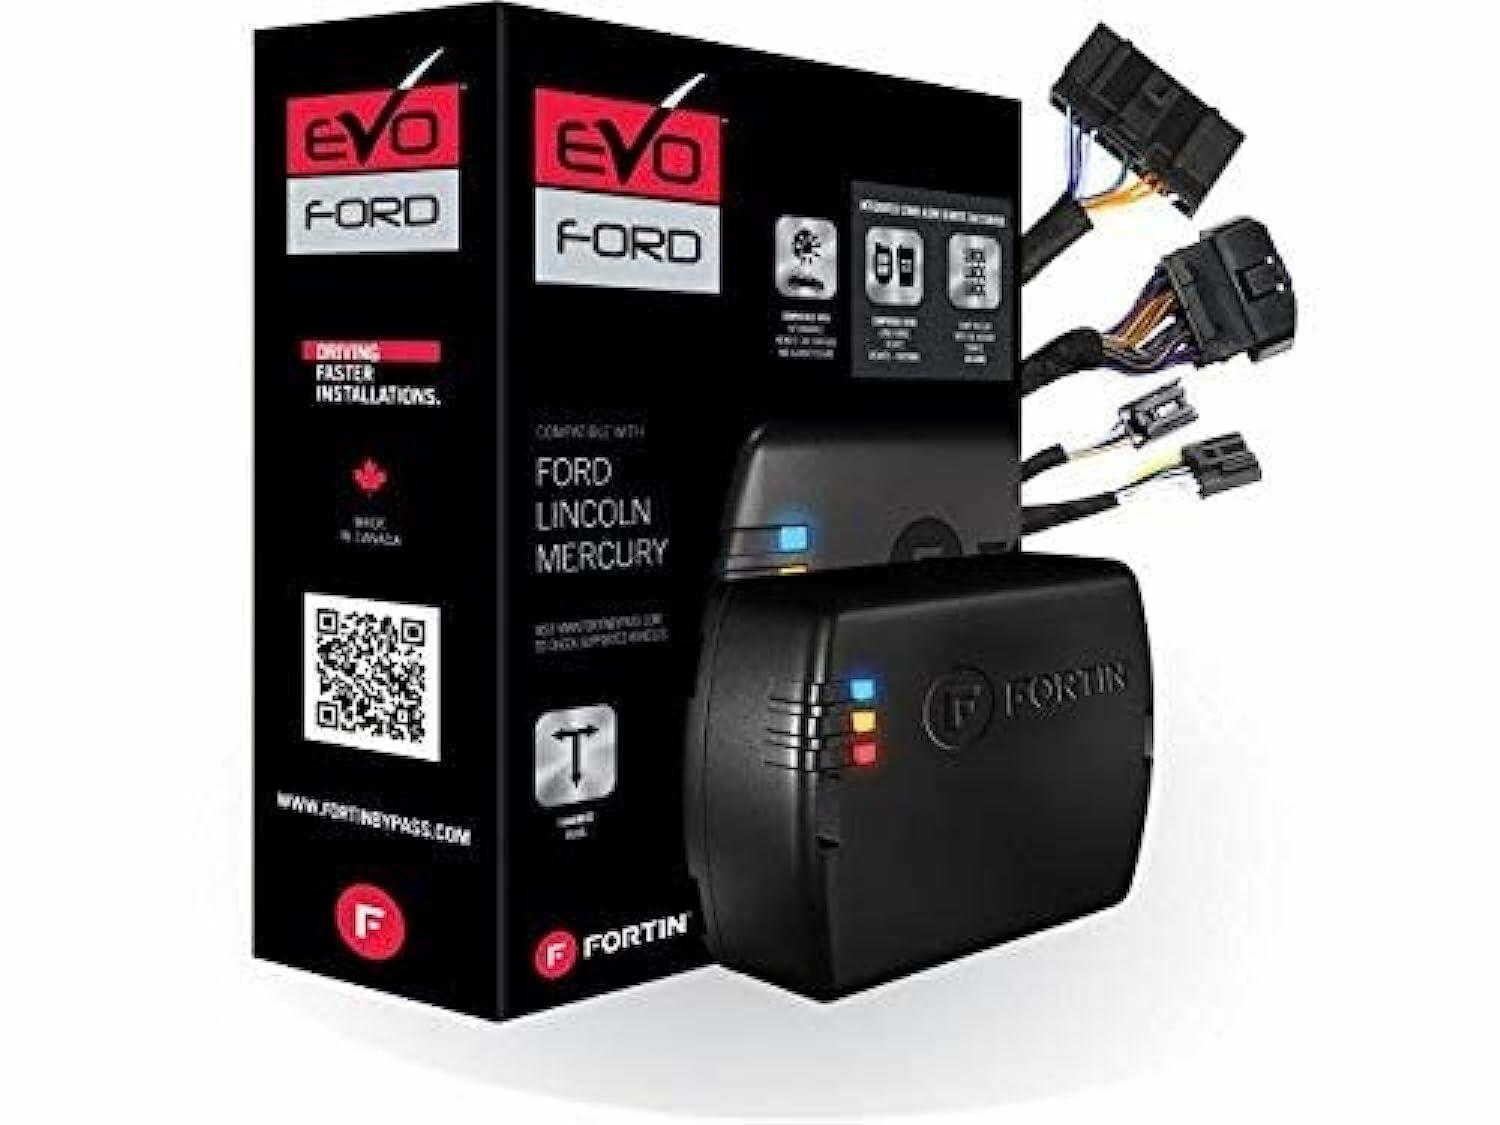 Fortin EVO-FORT4 Module & T-Harness combo for 2008+ Ford, Lincoln and Mercury Standard Key vehicles.